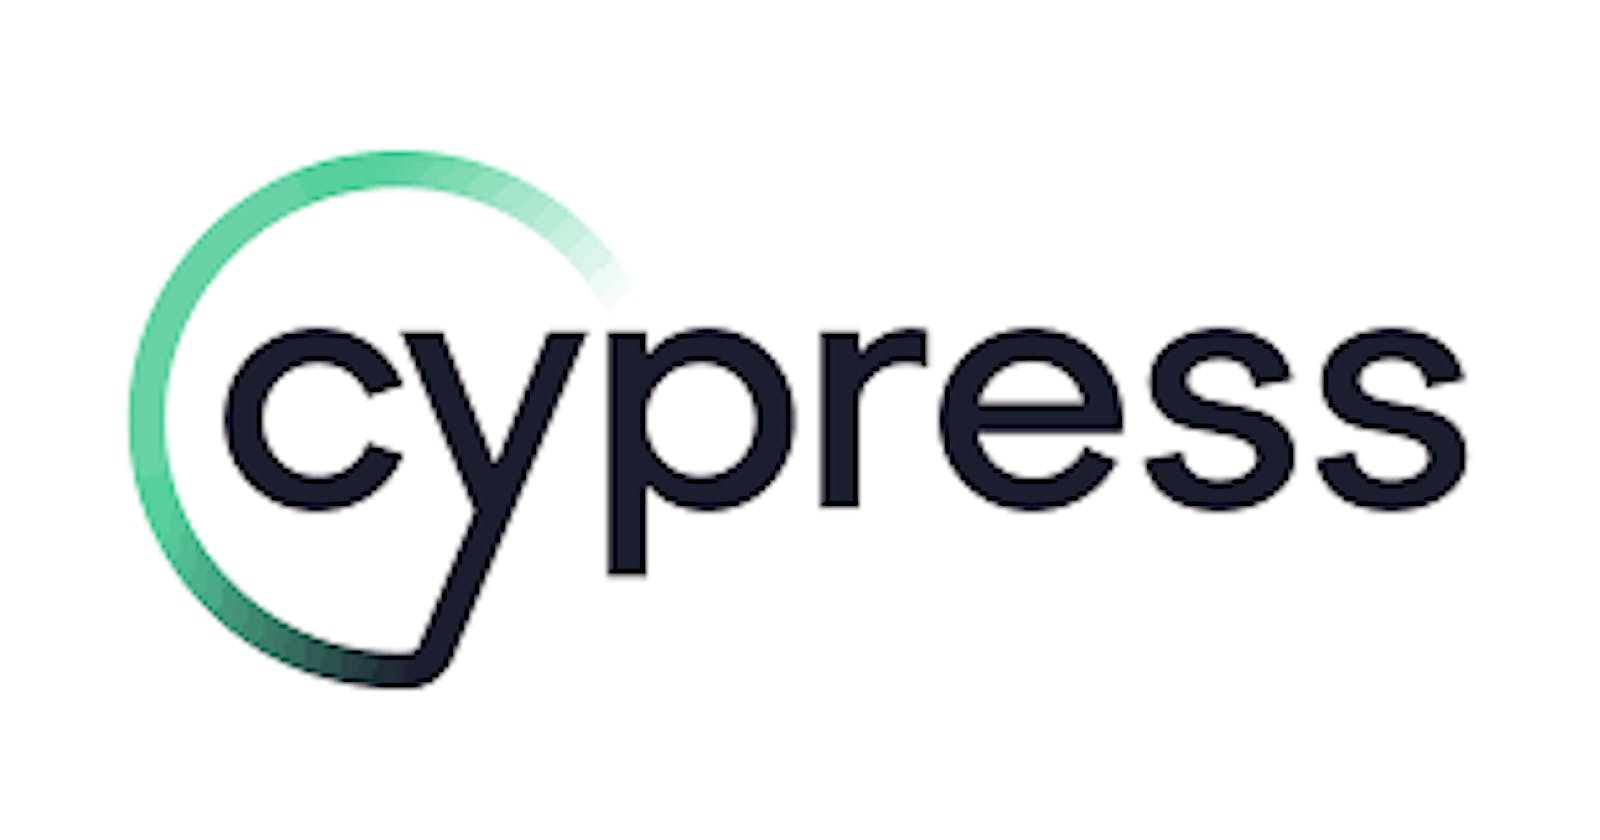 What’s new in Cypress 11?